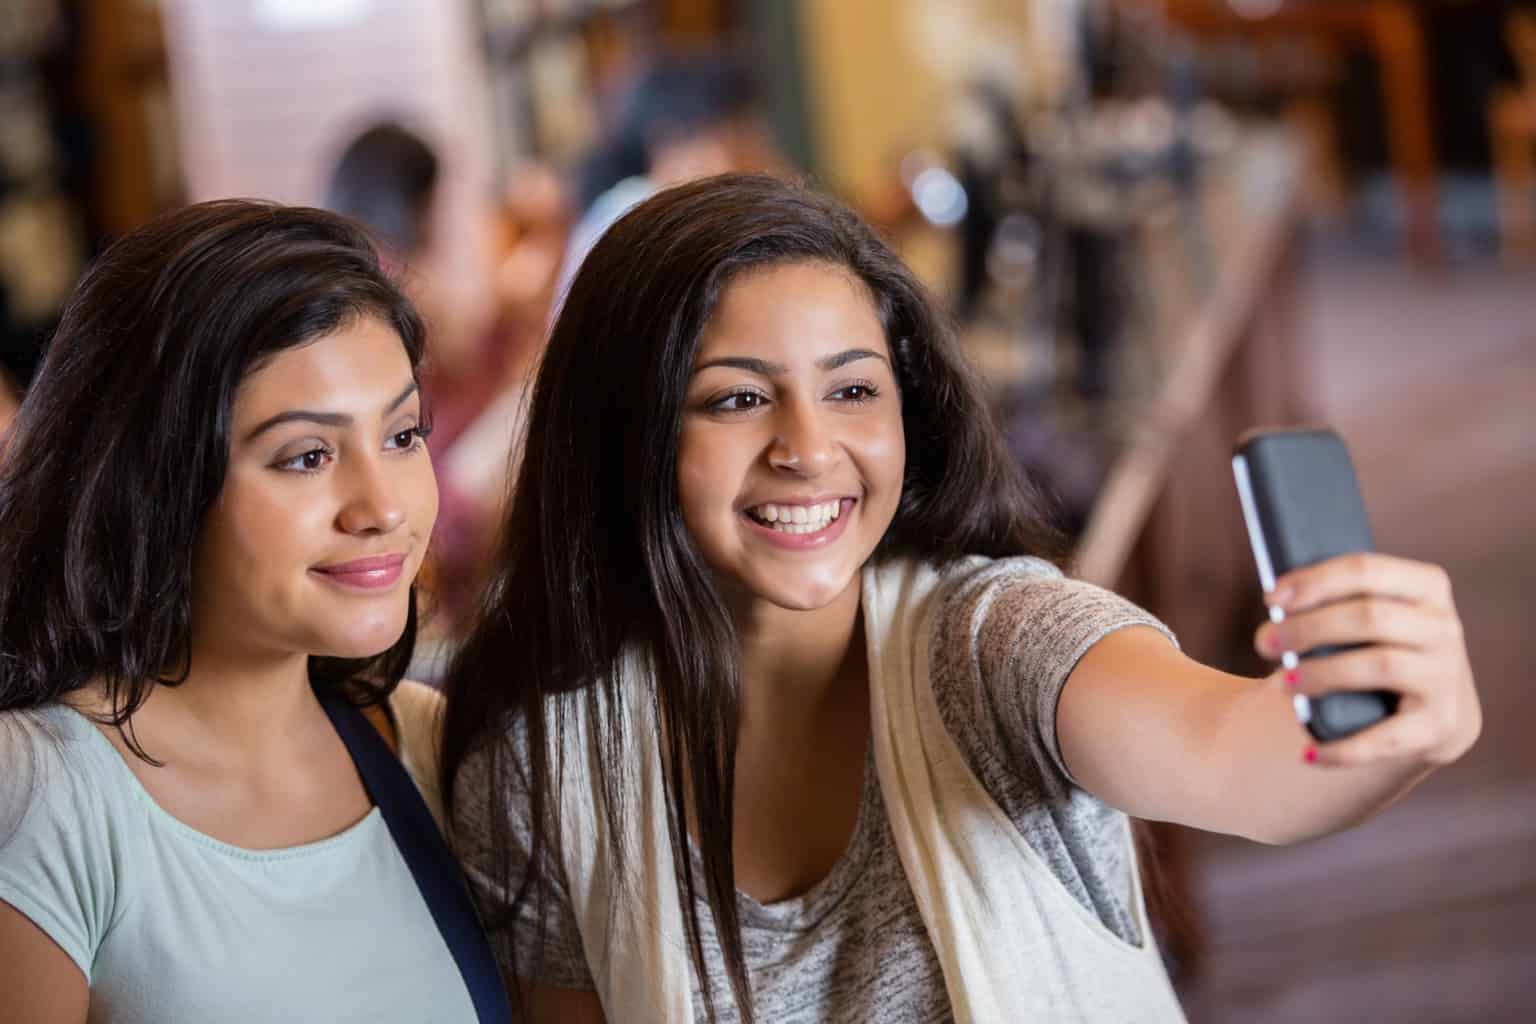 two young girls taking a selfie